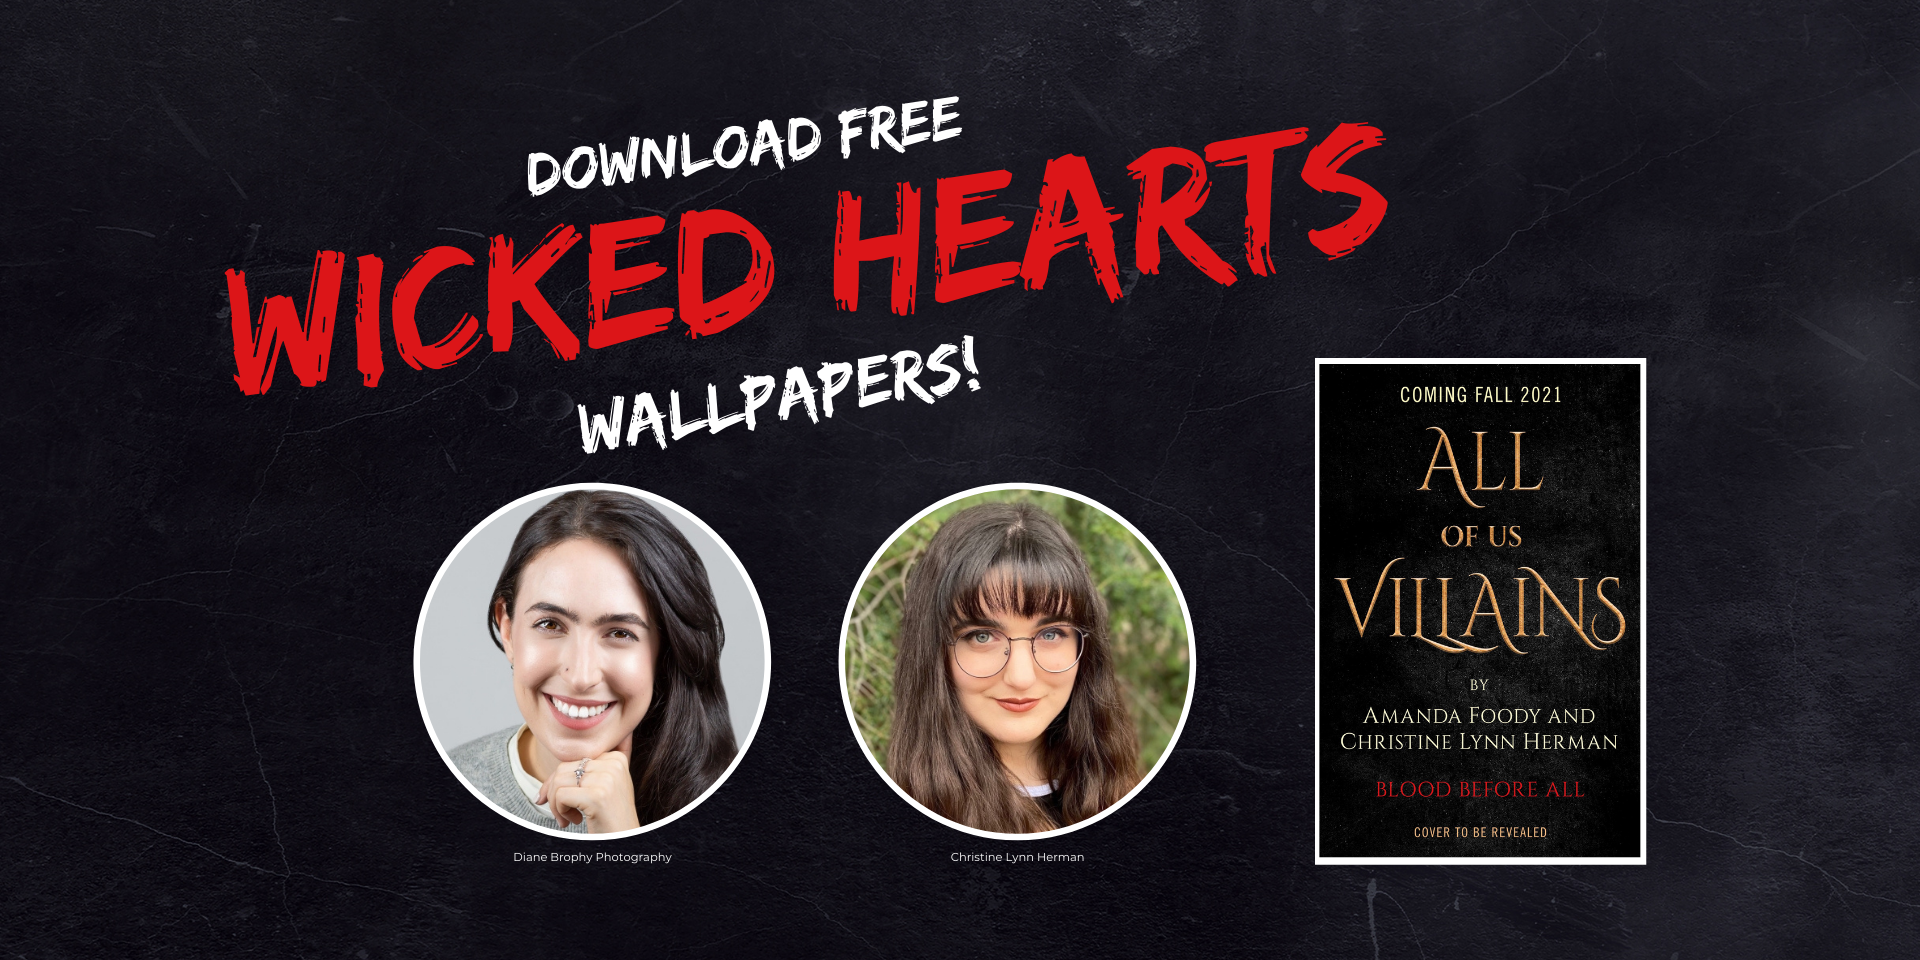 Your Wicked Heart Can’t Resist These Free <i>All of Us Villains</i> Wallpapers!